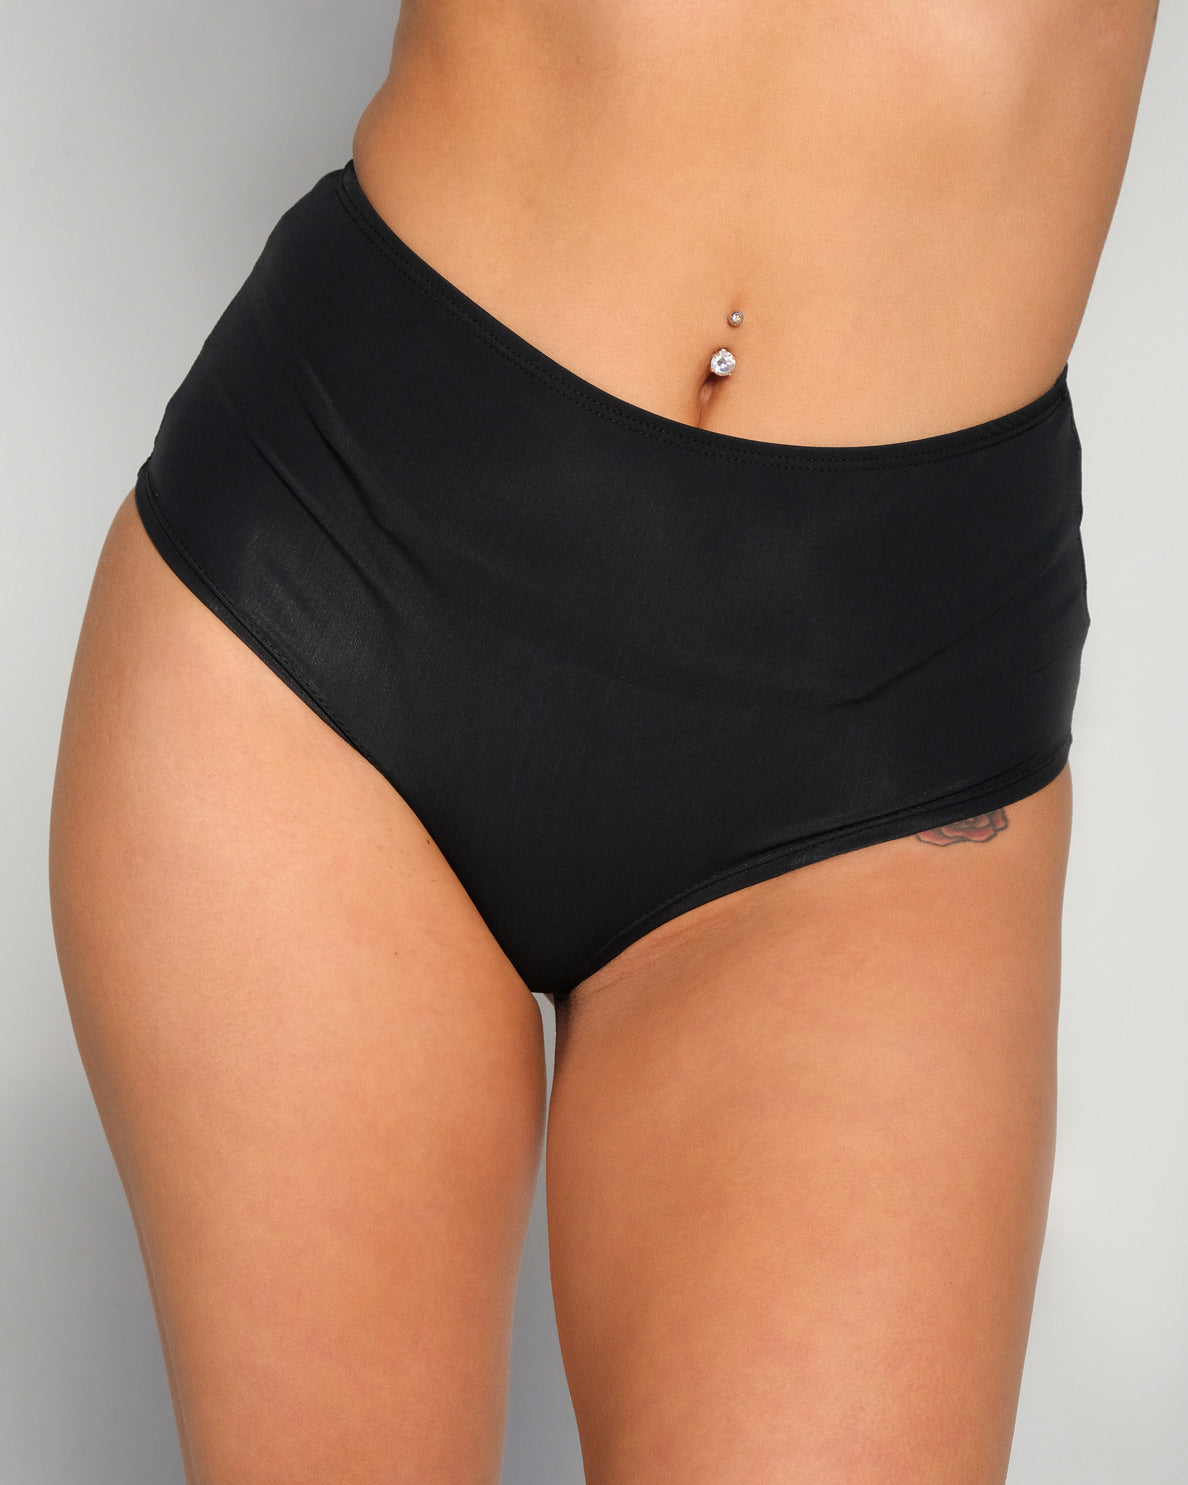 ToBeInStyle Women's Micro Mini Rave Booty Shorts Hipsters Cheeky Boyshorts  - Black at  Women's Clothing store